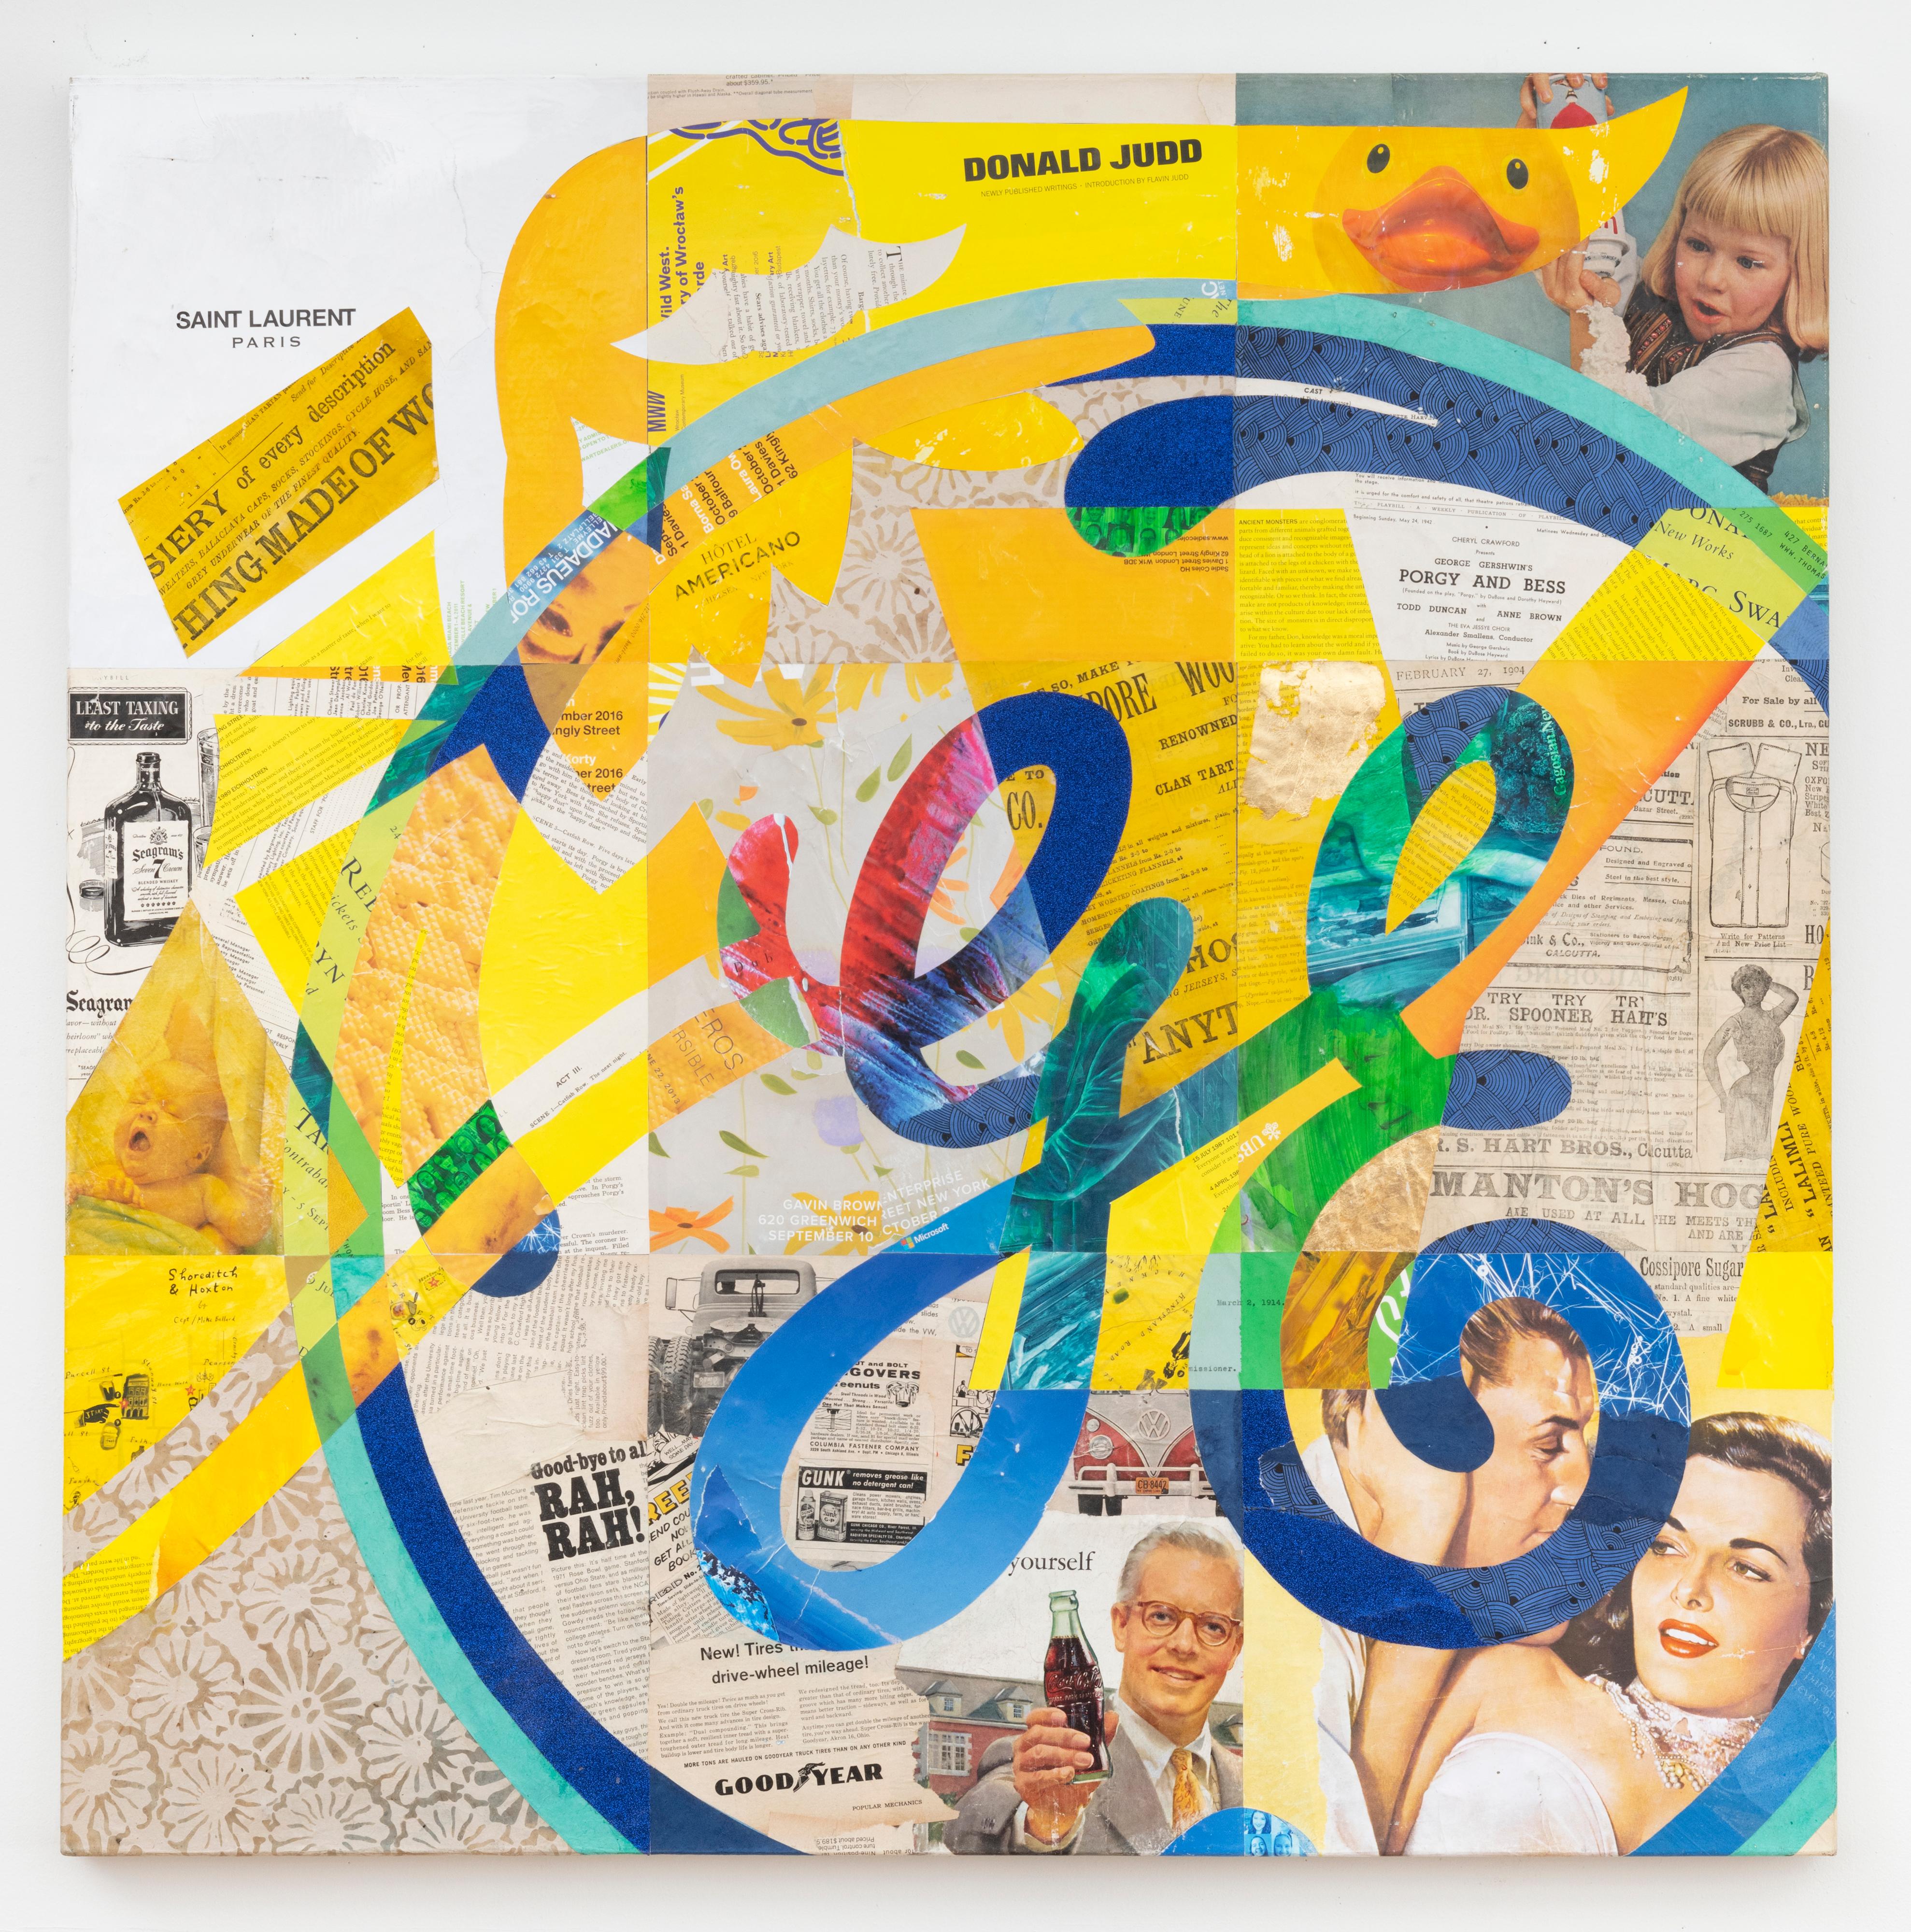 GE X Goodyear - Painting by Cey Adams